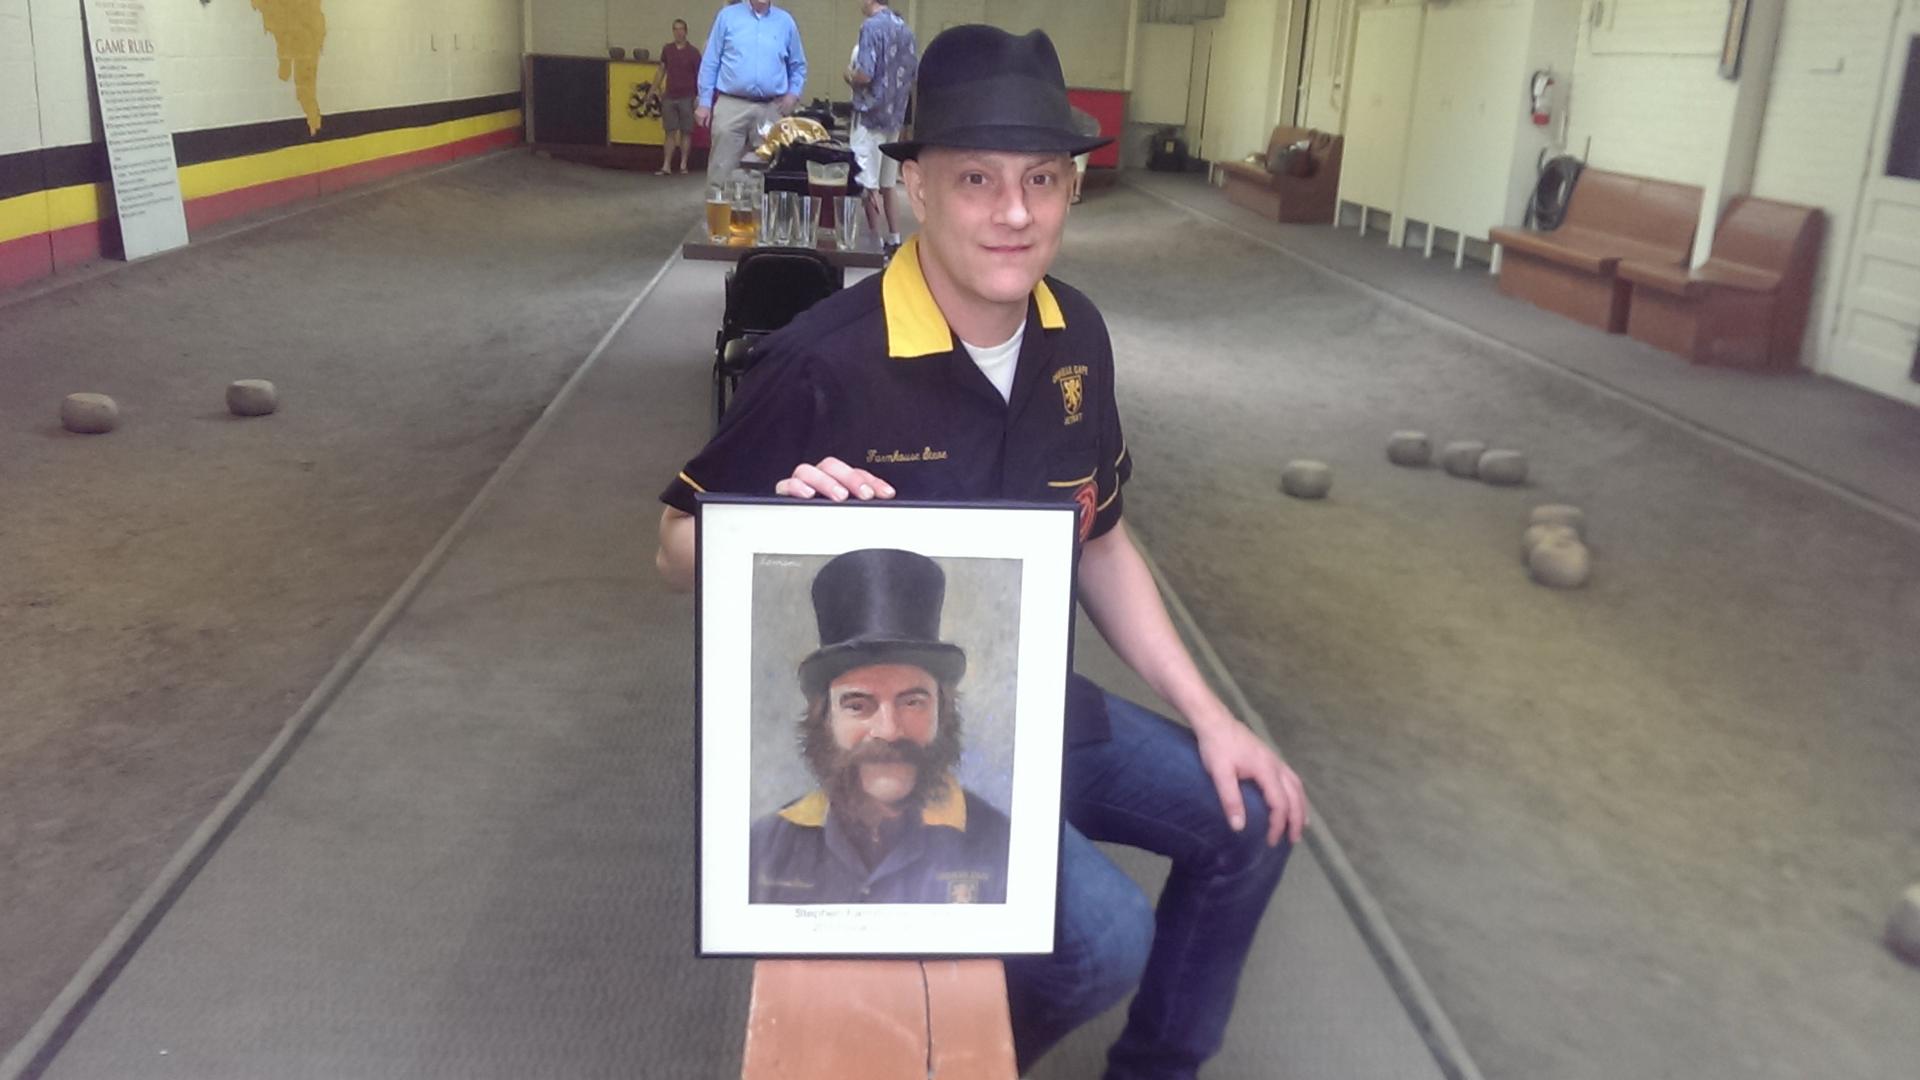 Steve Gosskie, the 2013 Featherbowling chamption in the Cadieux Cafe. Gosskie holds the second portrait that Jerry Lemenu painted for him. The first was stolen and never returned.